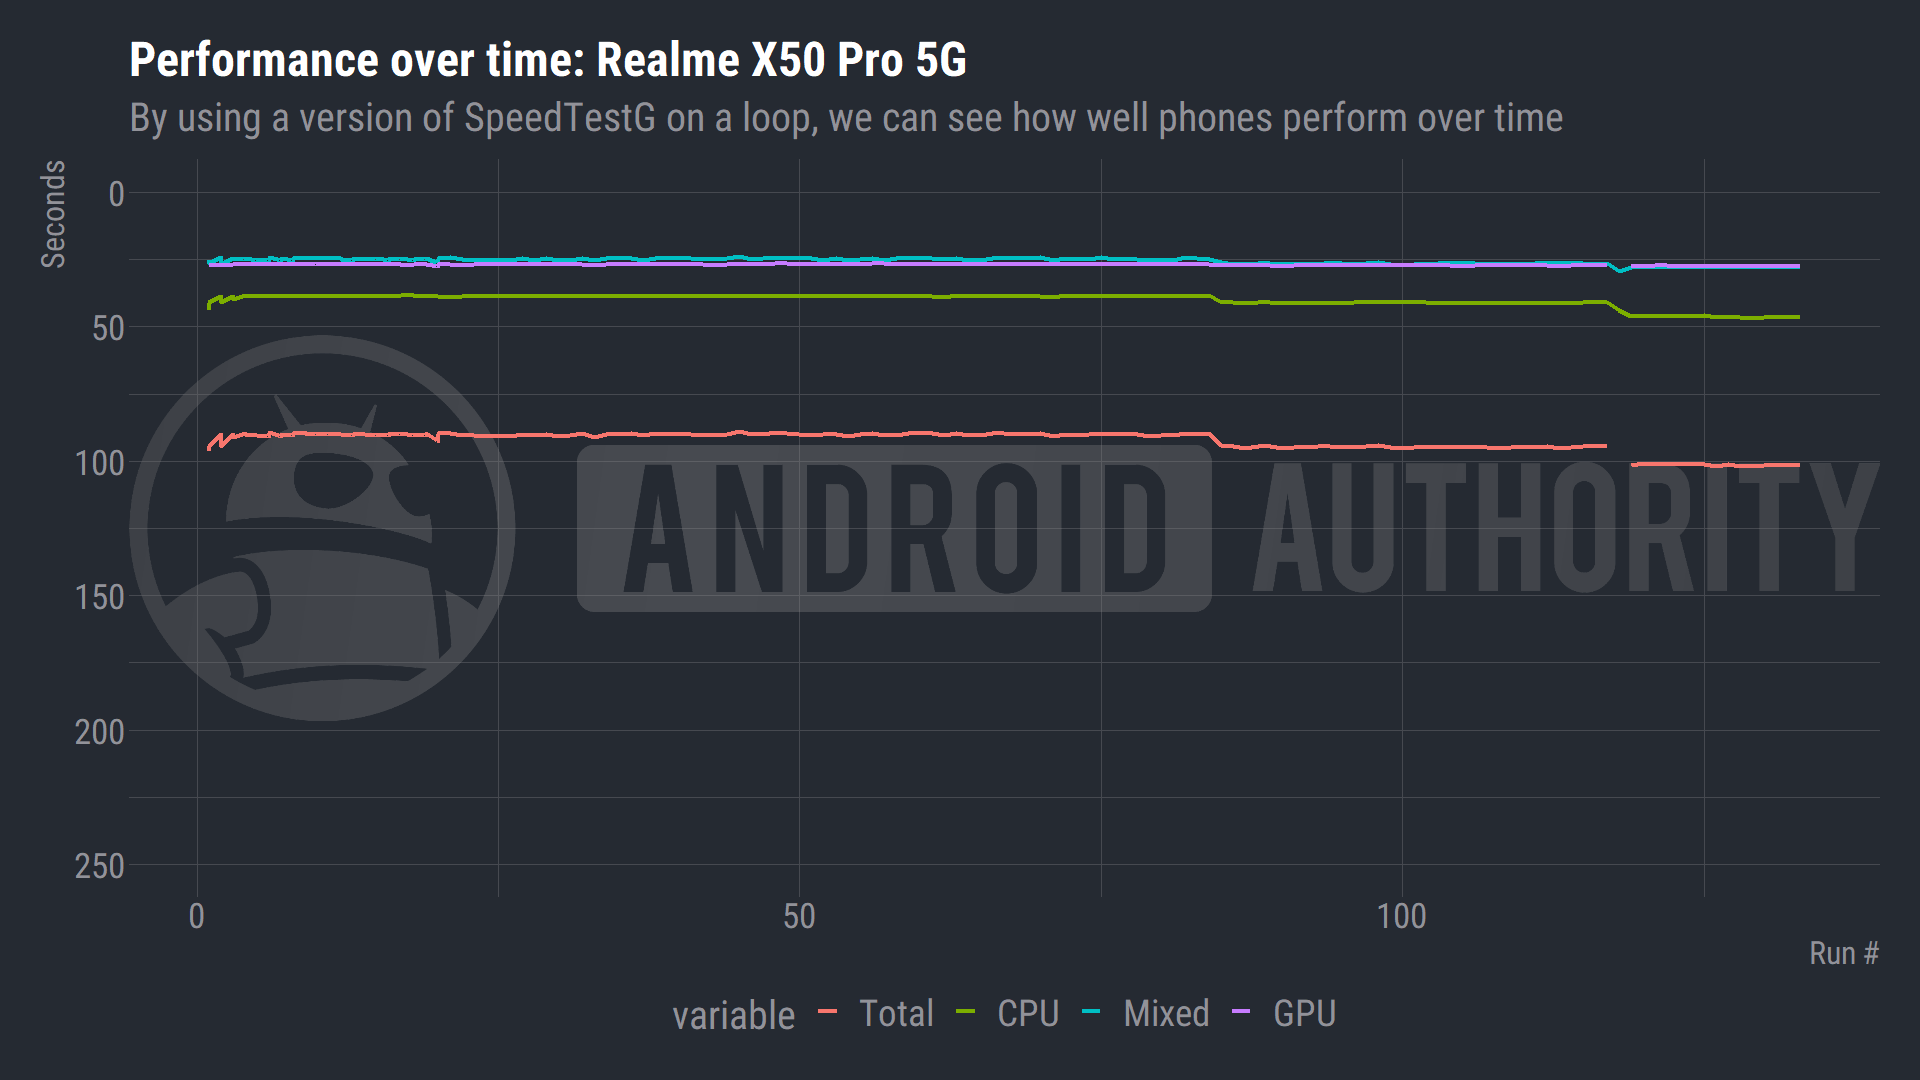 A plot showing the sustained performance of the Realme X50 Pro 5G